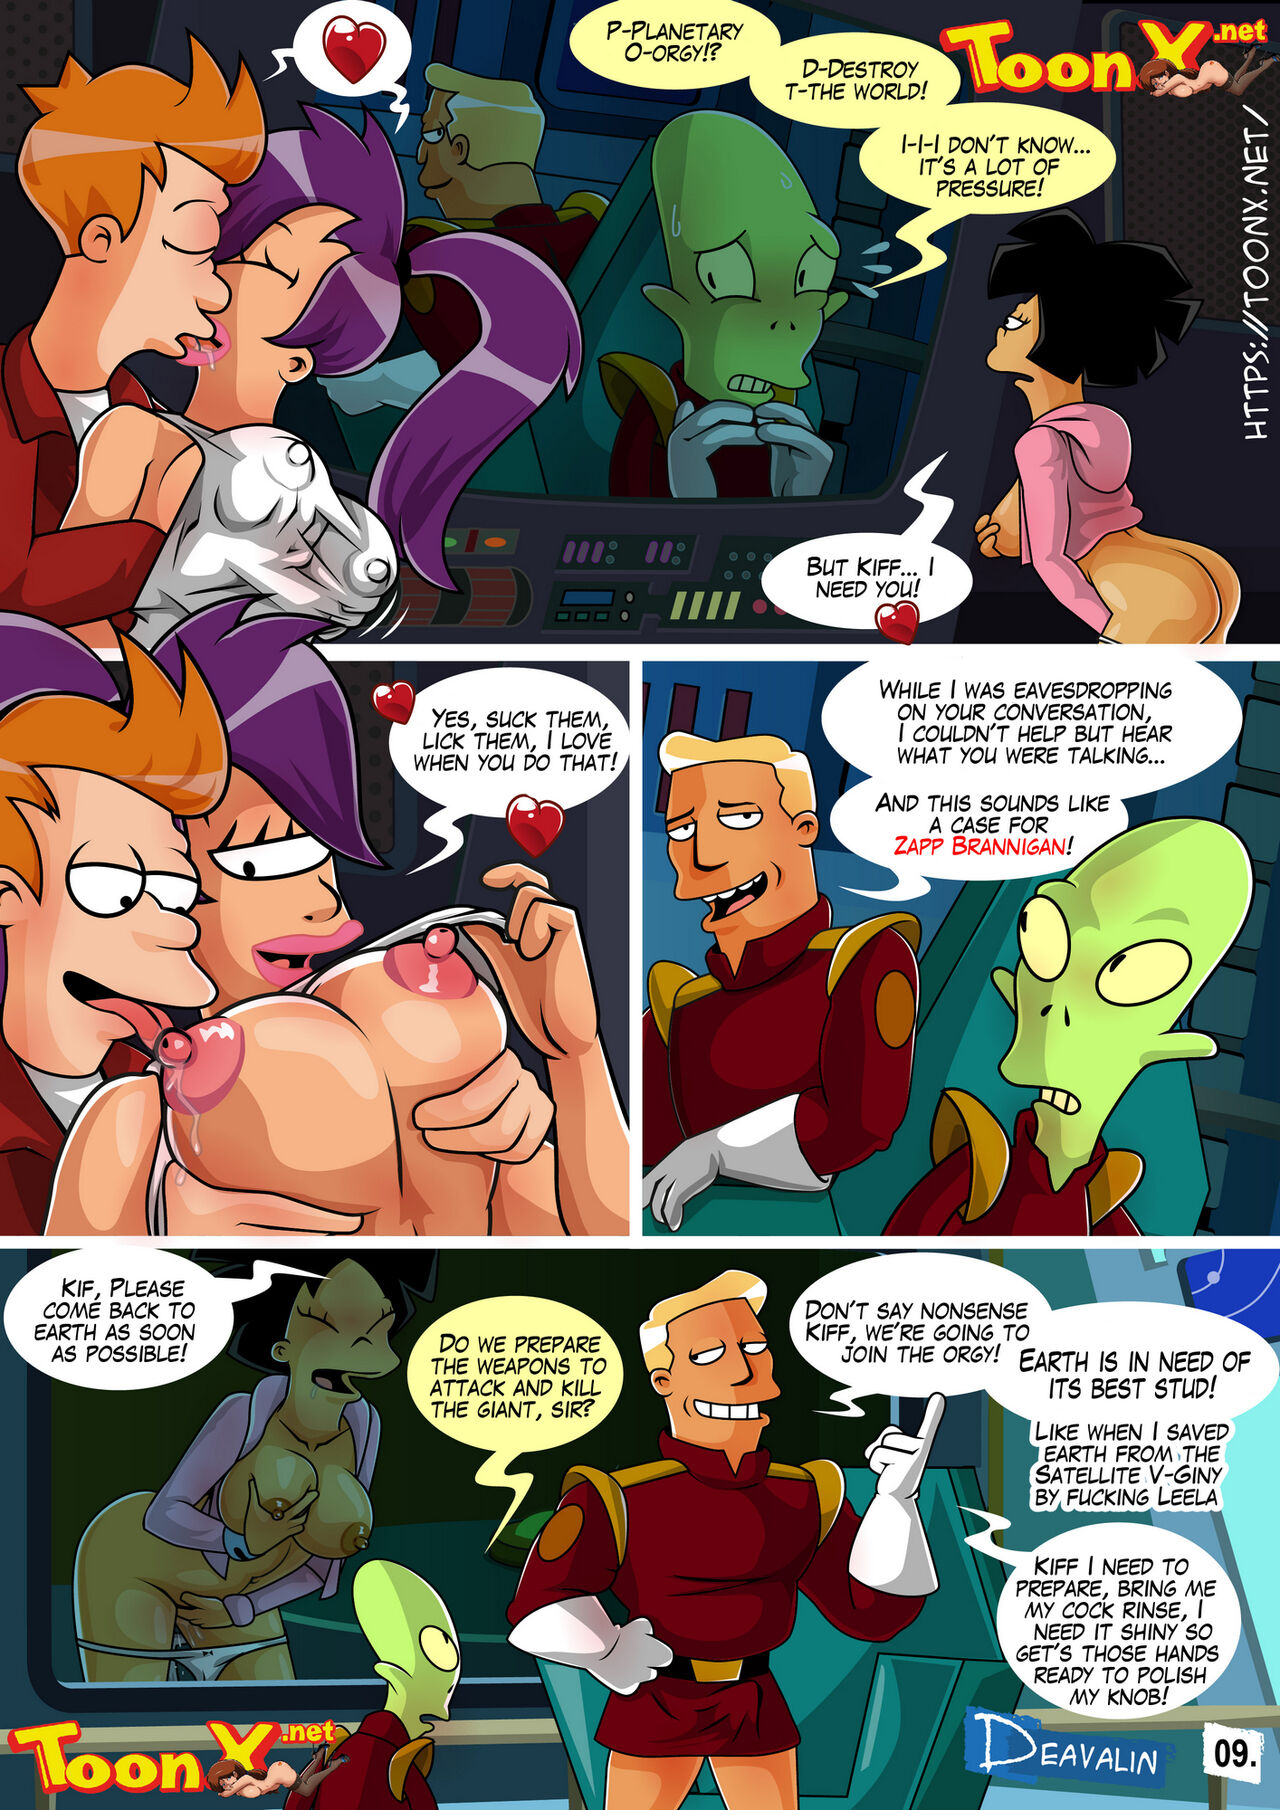 Orgy To Save The Earth – Deavalin 10